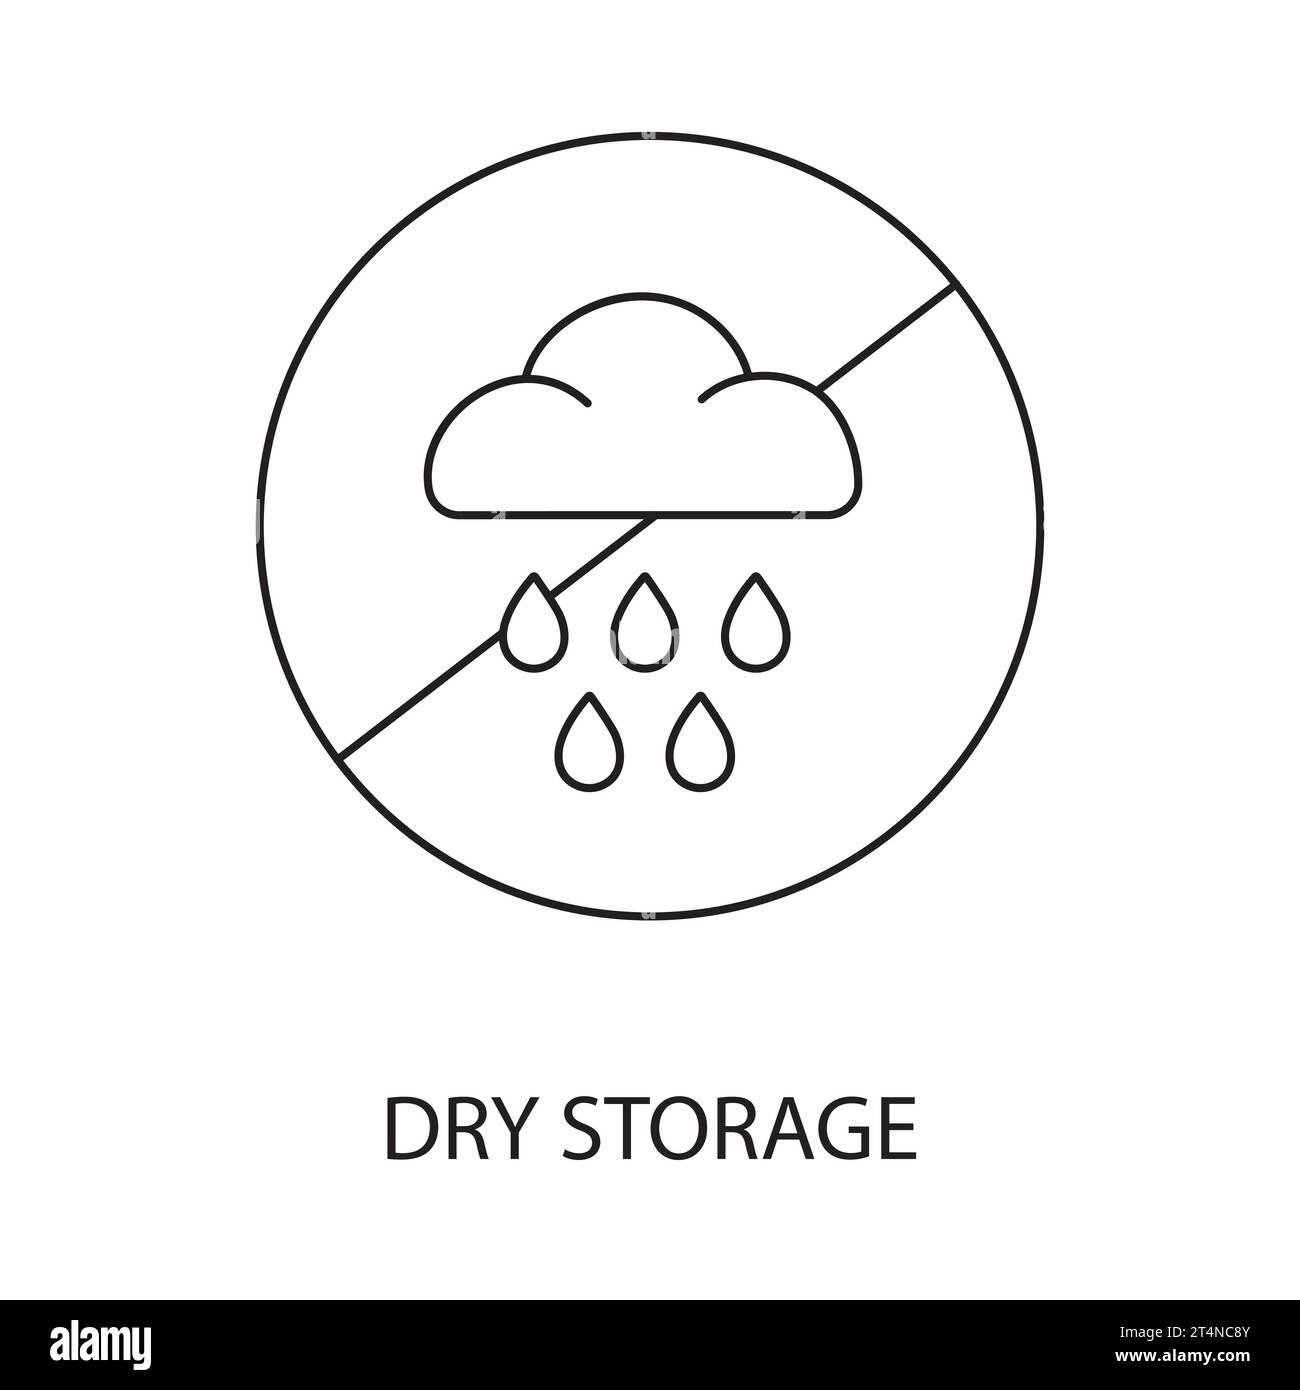 Storing in a dry place line vector for food packaging, illustration of a crossed out circle, inside which is a cloud with rain, protect from moisture. Stock Vector